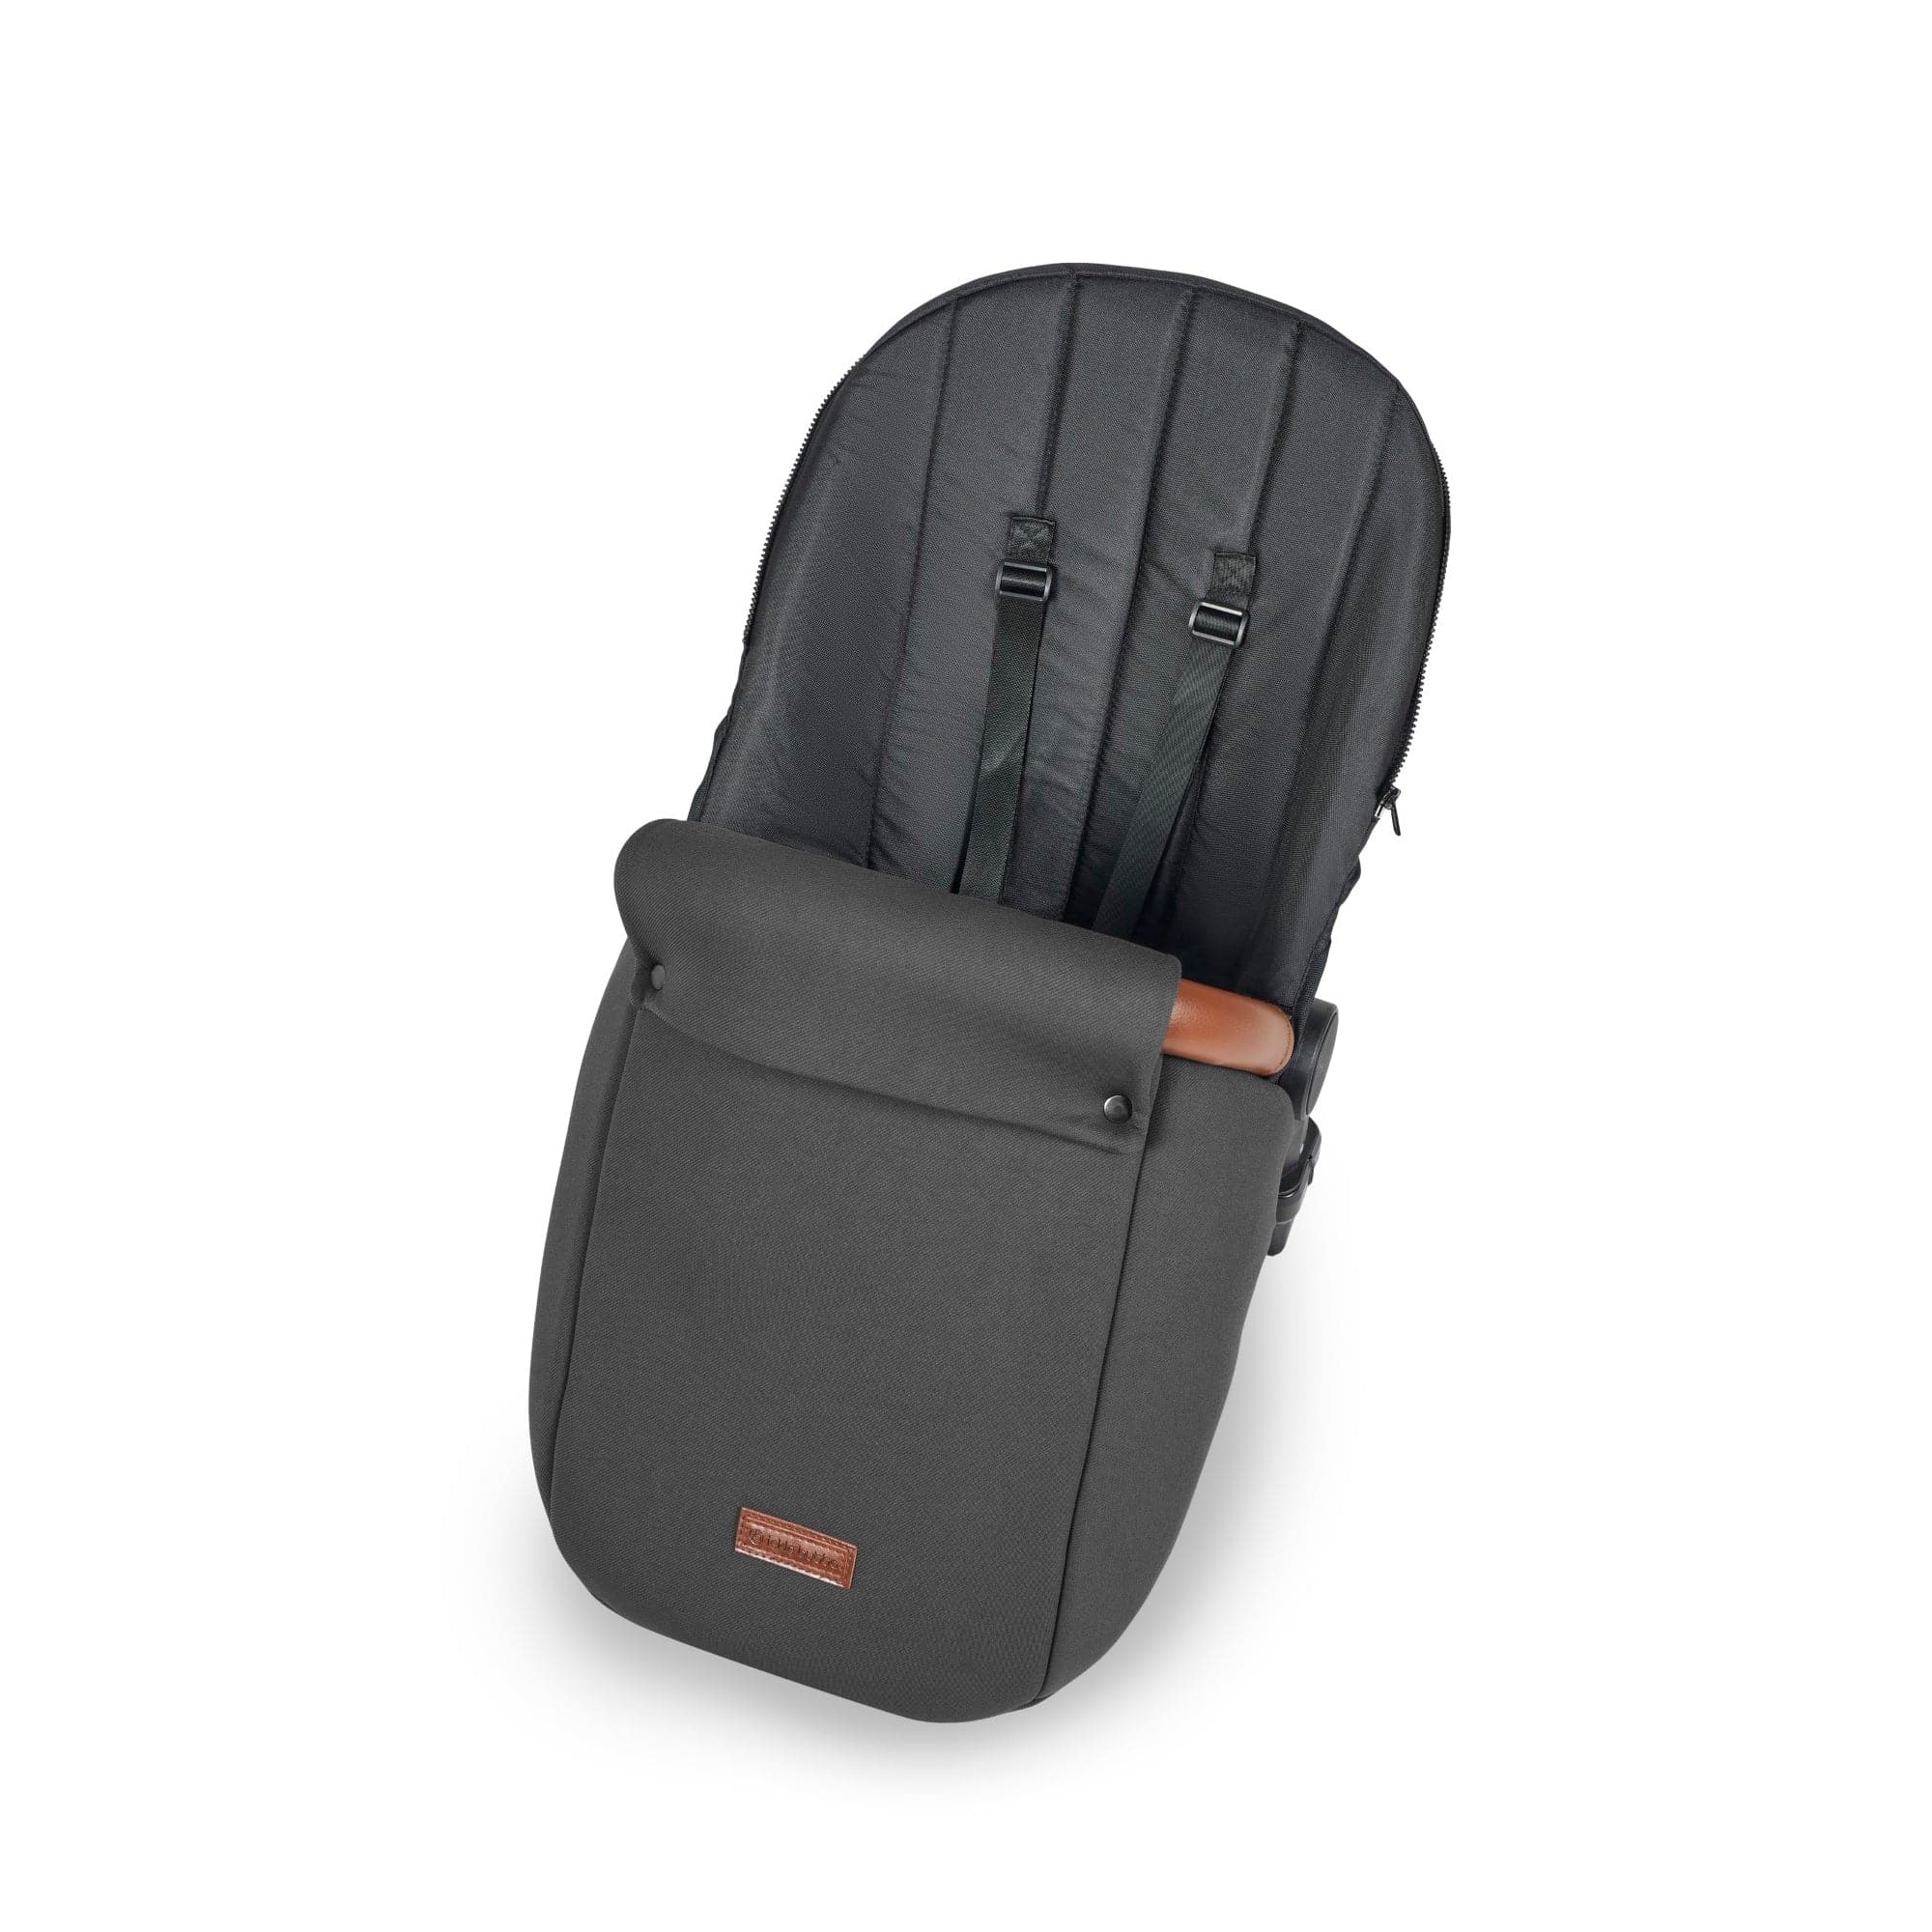 Ickle Bubba Stomp Luxe All-in-One I-Size Travel System With Isofix Base - Black / Charcoal Grey / Tan -  | For Your Little One